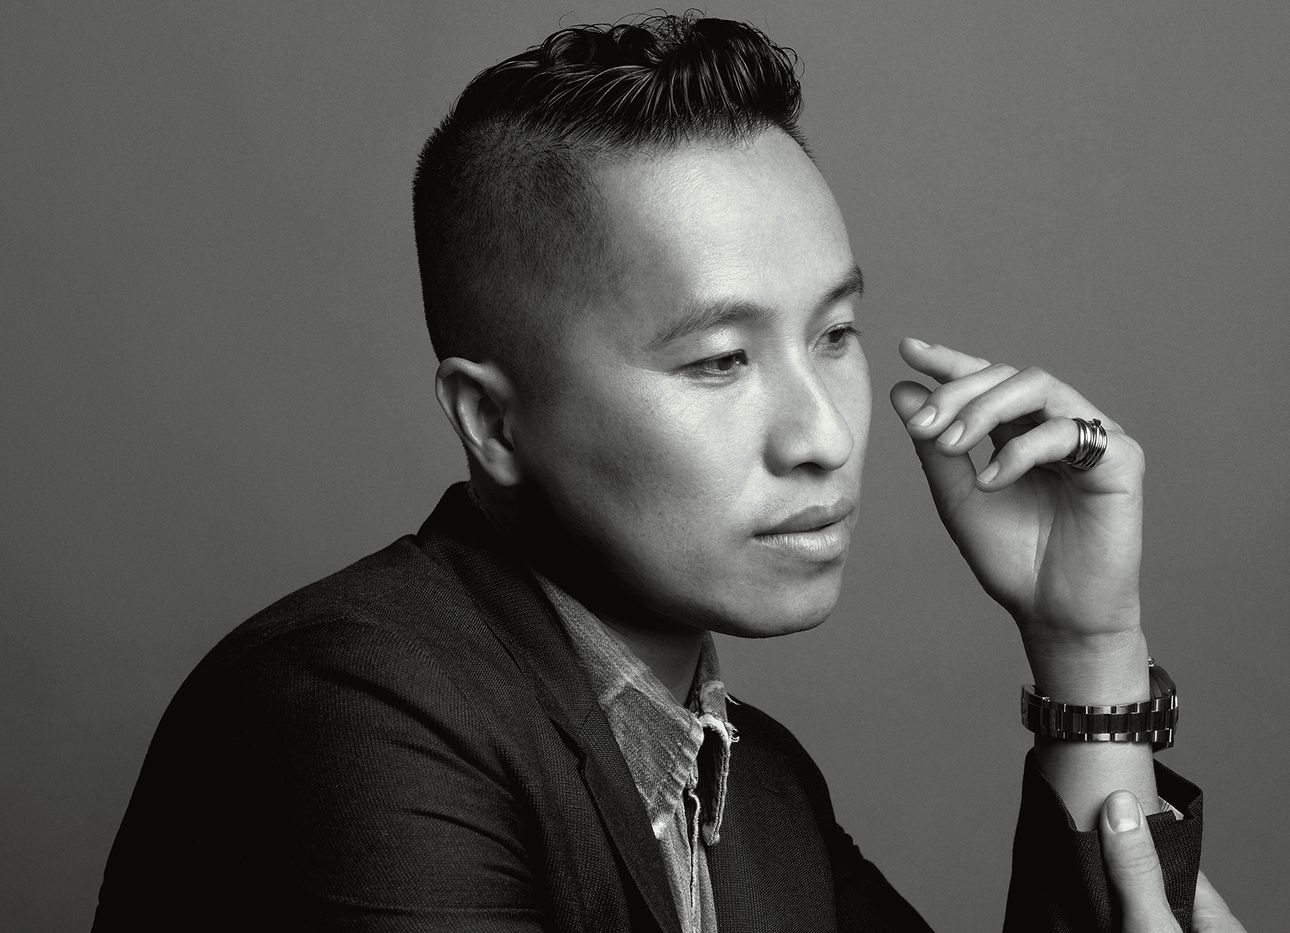 Fashion designer Phillip Lim in profile, in a suit, in a black and white photograph.